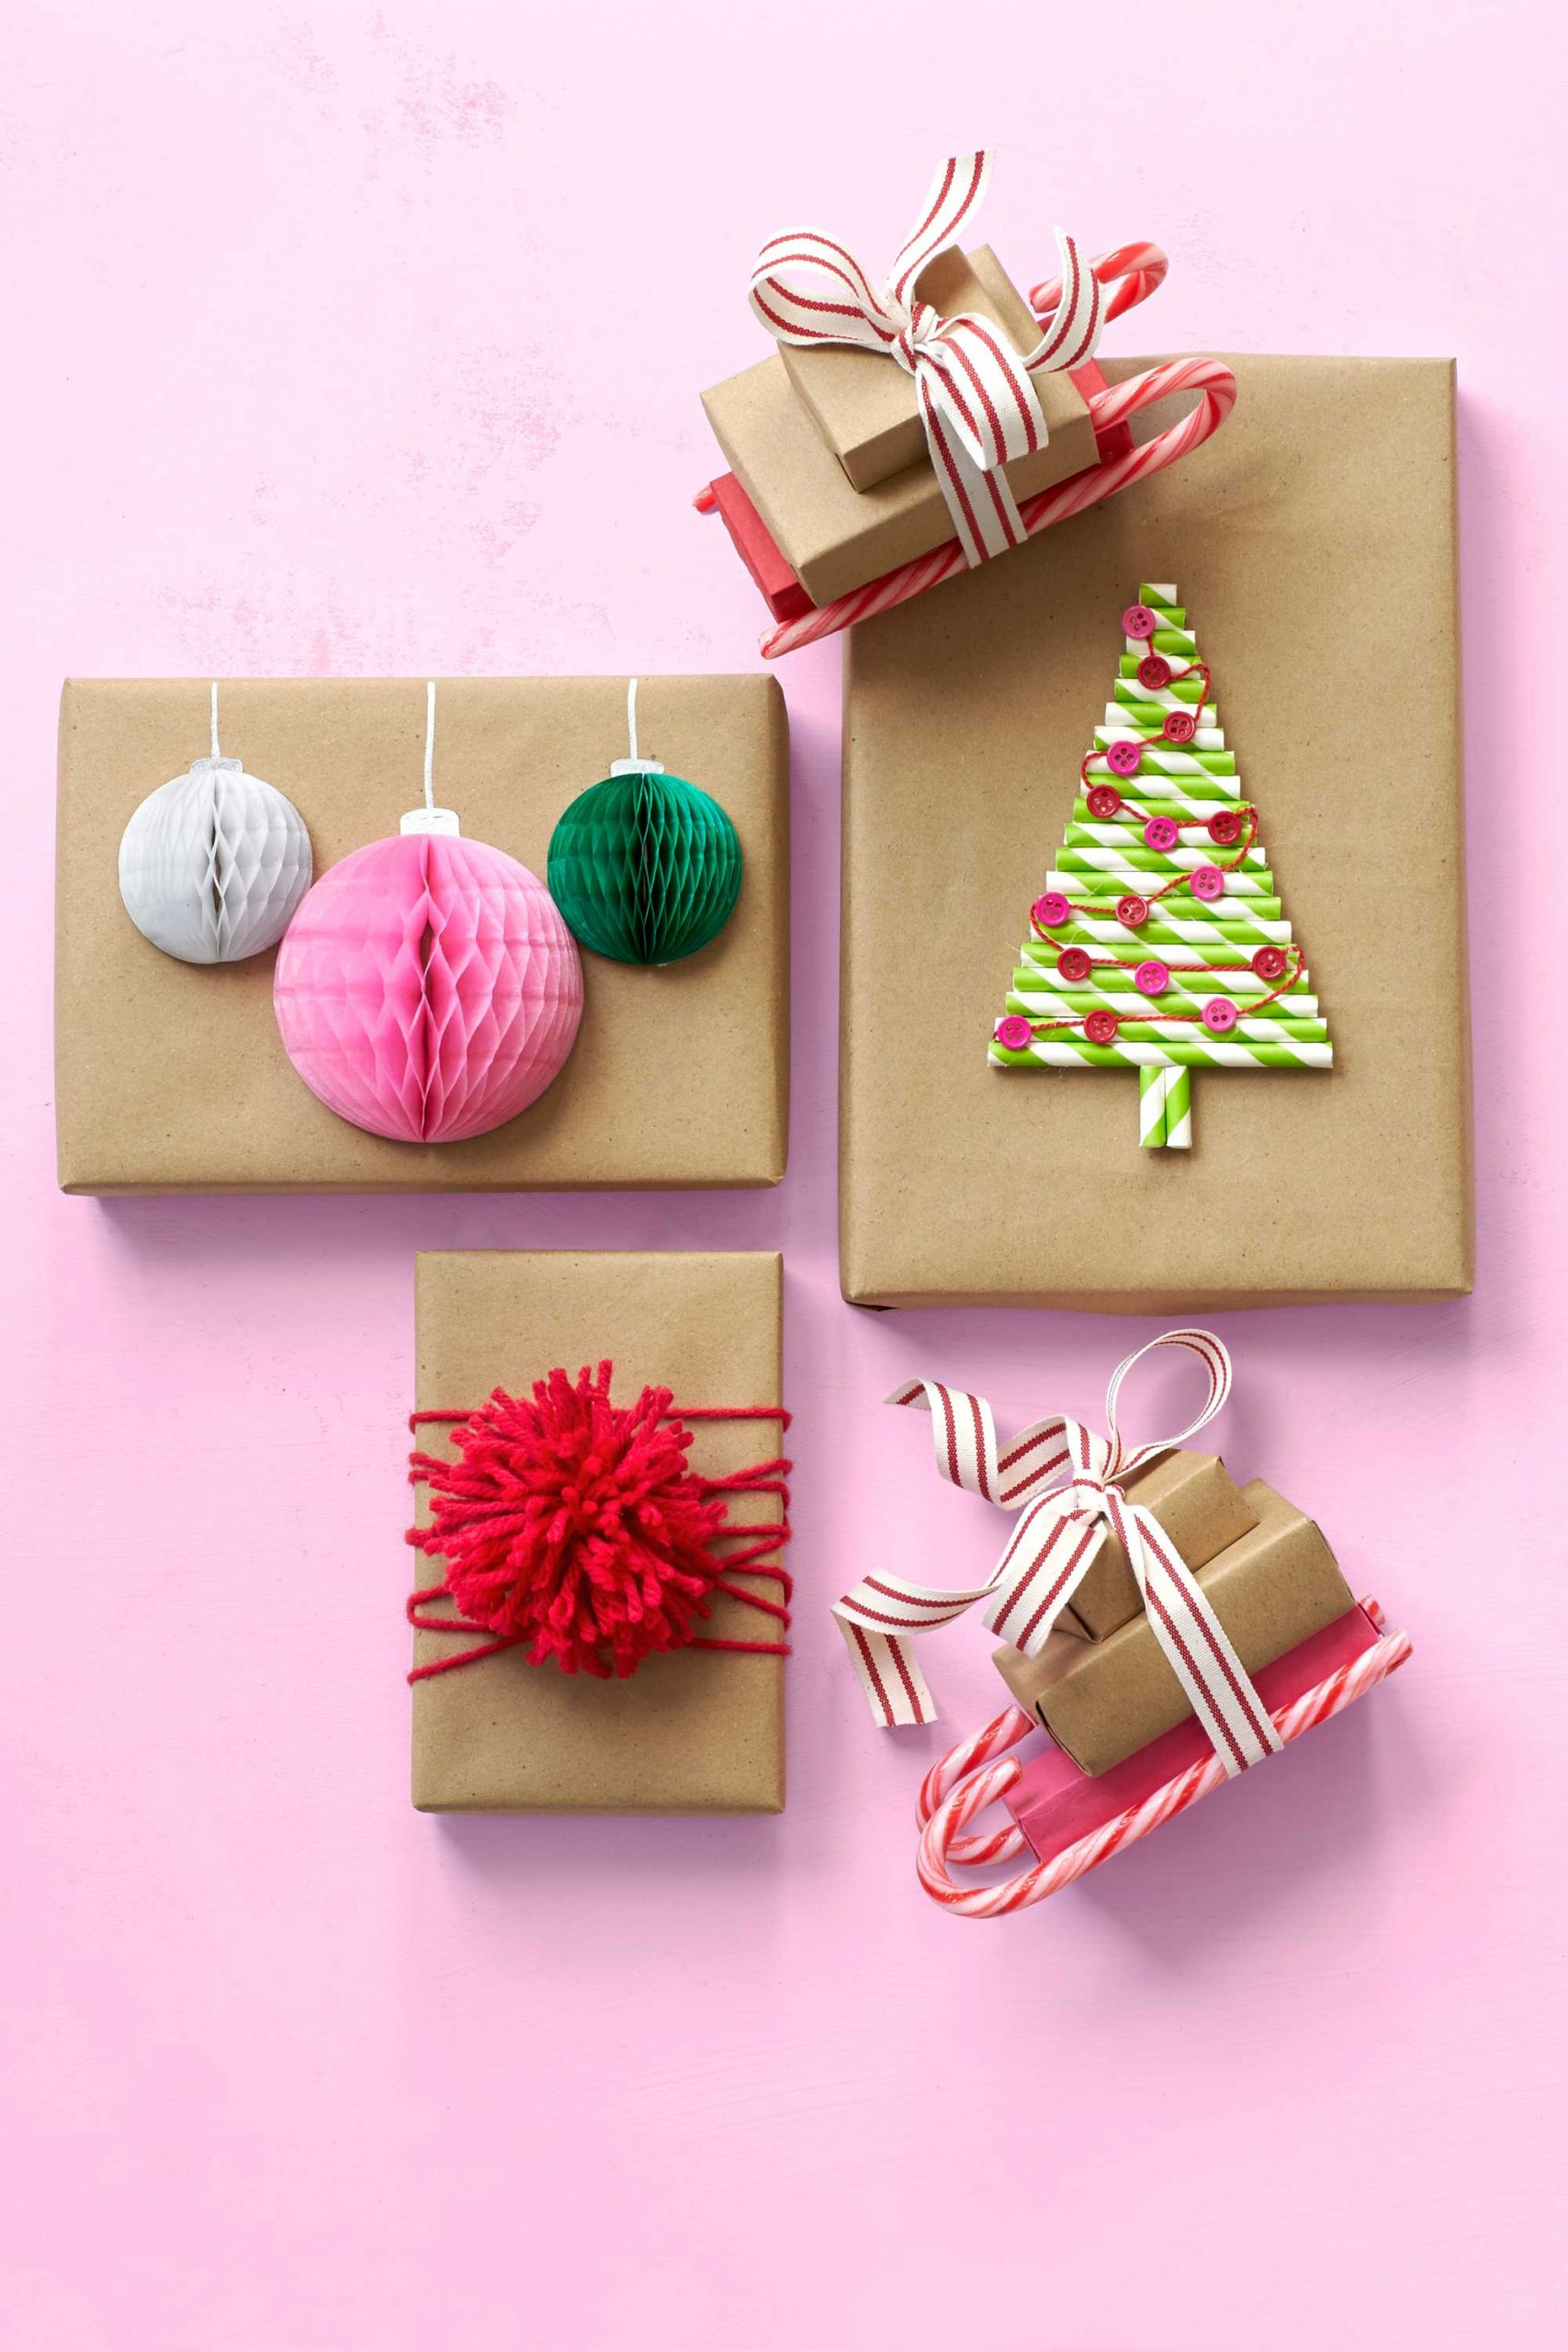 Cool Holiday Gift Ideas
 30 Unique Gift Wrapping Ideas for Christmas How to Wrap